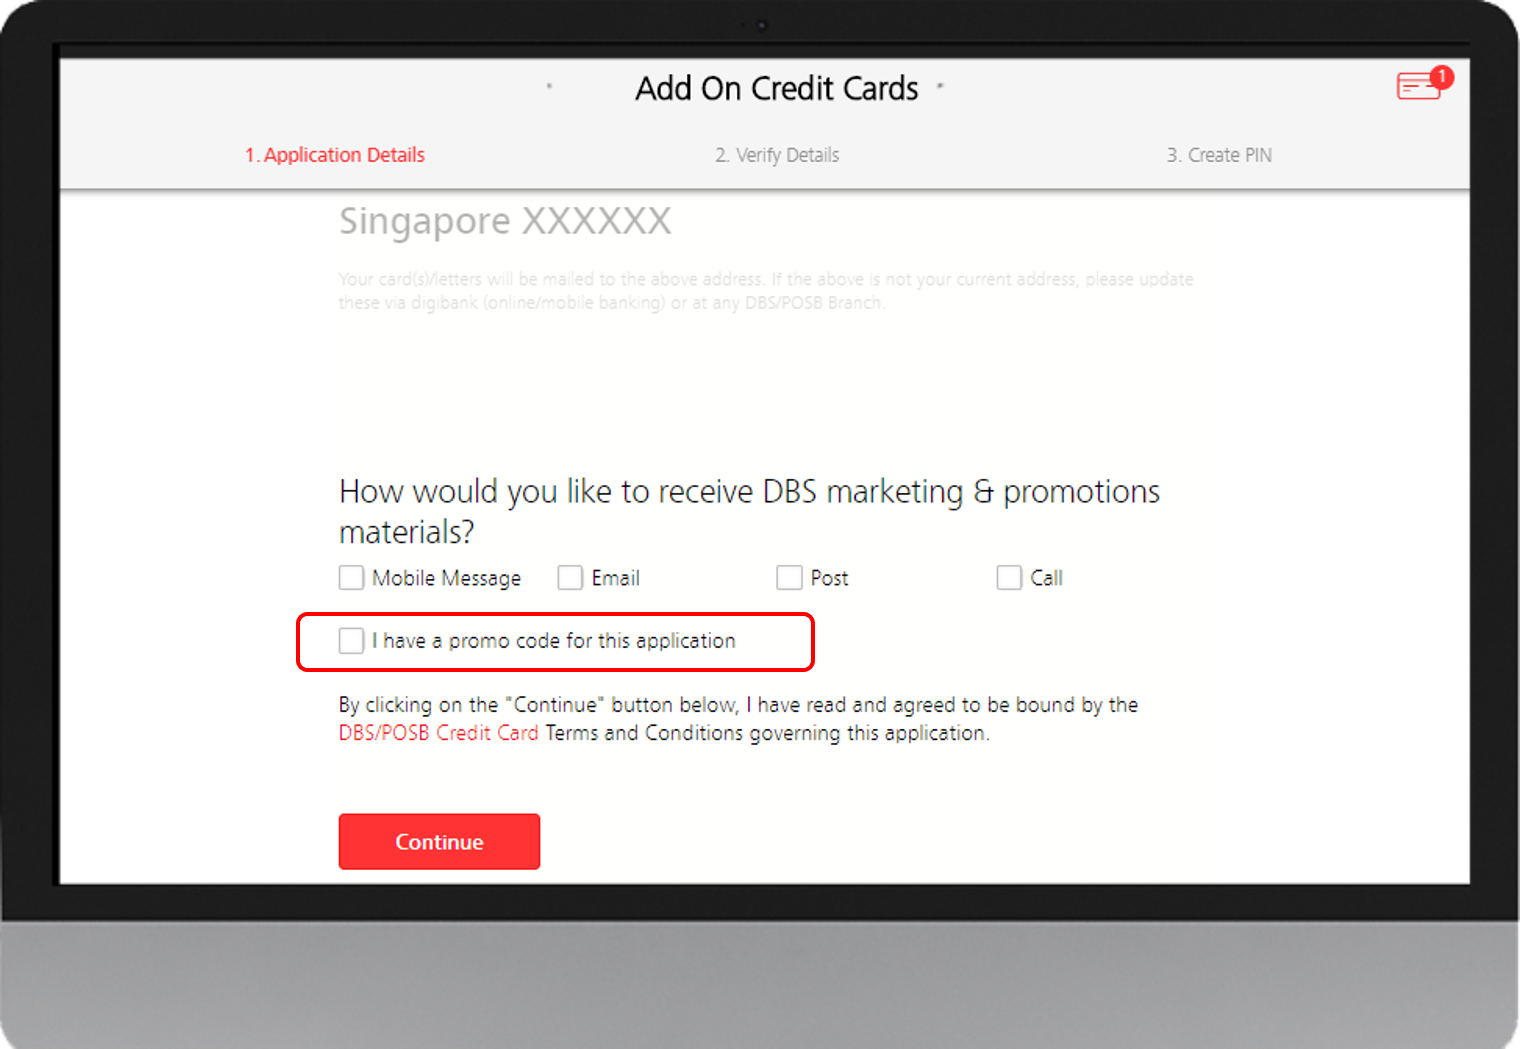 Dbs Bank Code - Ithrm5mhabk4um - Find out more information about this bank or institution.